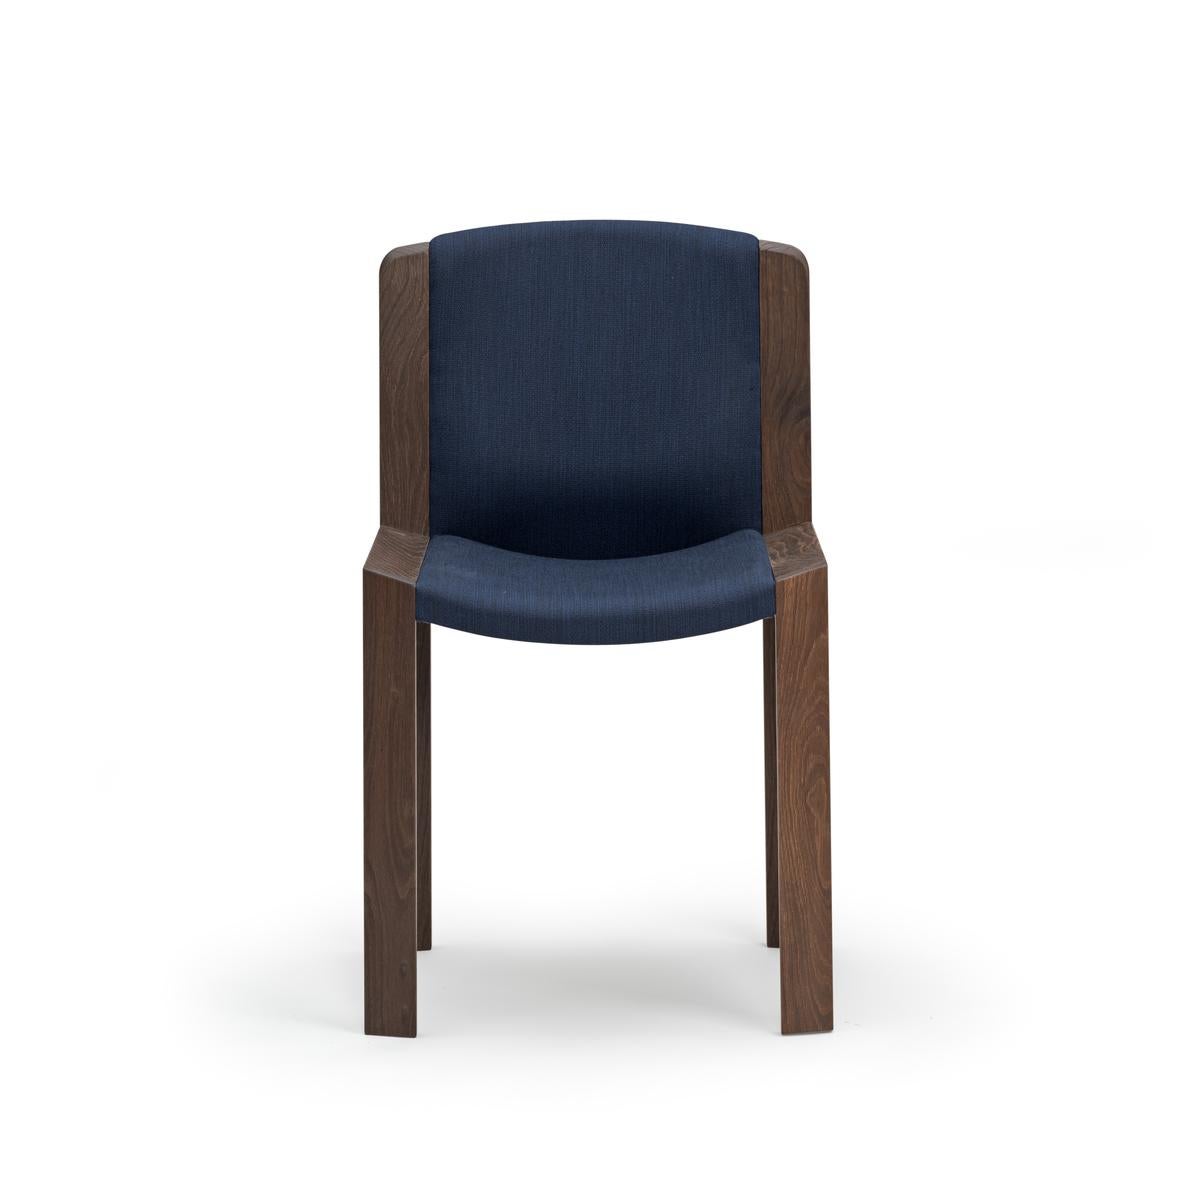 Chair designed by Joe Colombo in 1965.

Designed by the forward-thinking Italian designer Joe Colombo, chair 300 is a beautiful example of his functional design sensibility. Upholstered seat and back gently curved inside a modest, clear wooden